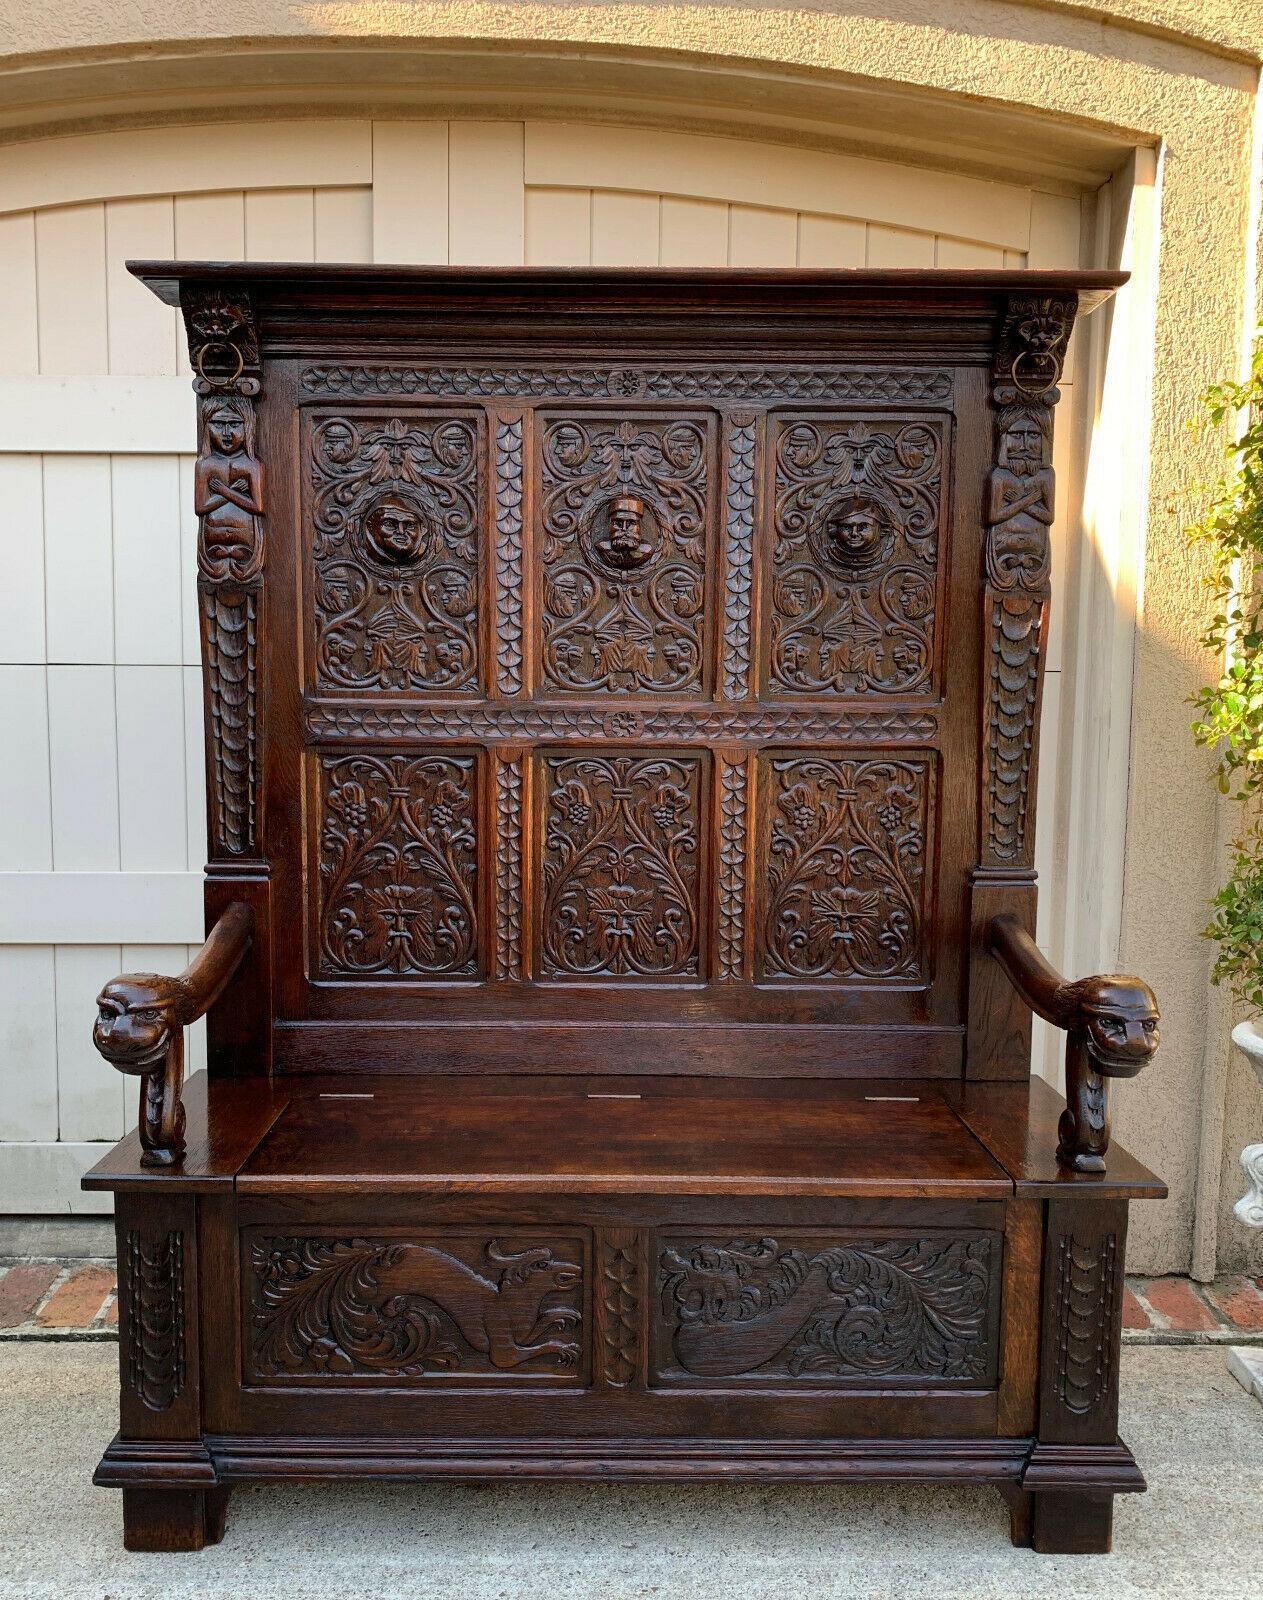 ~Direct from France~
~This gorgeous antique French hall bench has some of The Most intriguing carvings we have seen. It probably was commissioned by an aristocrat, and the carvings had specific meanings to the family.~
~Huge upper back panel is